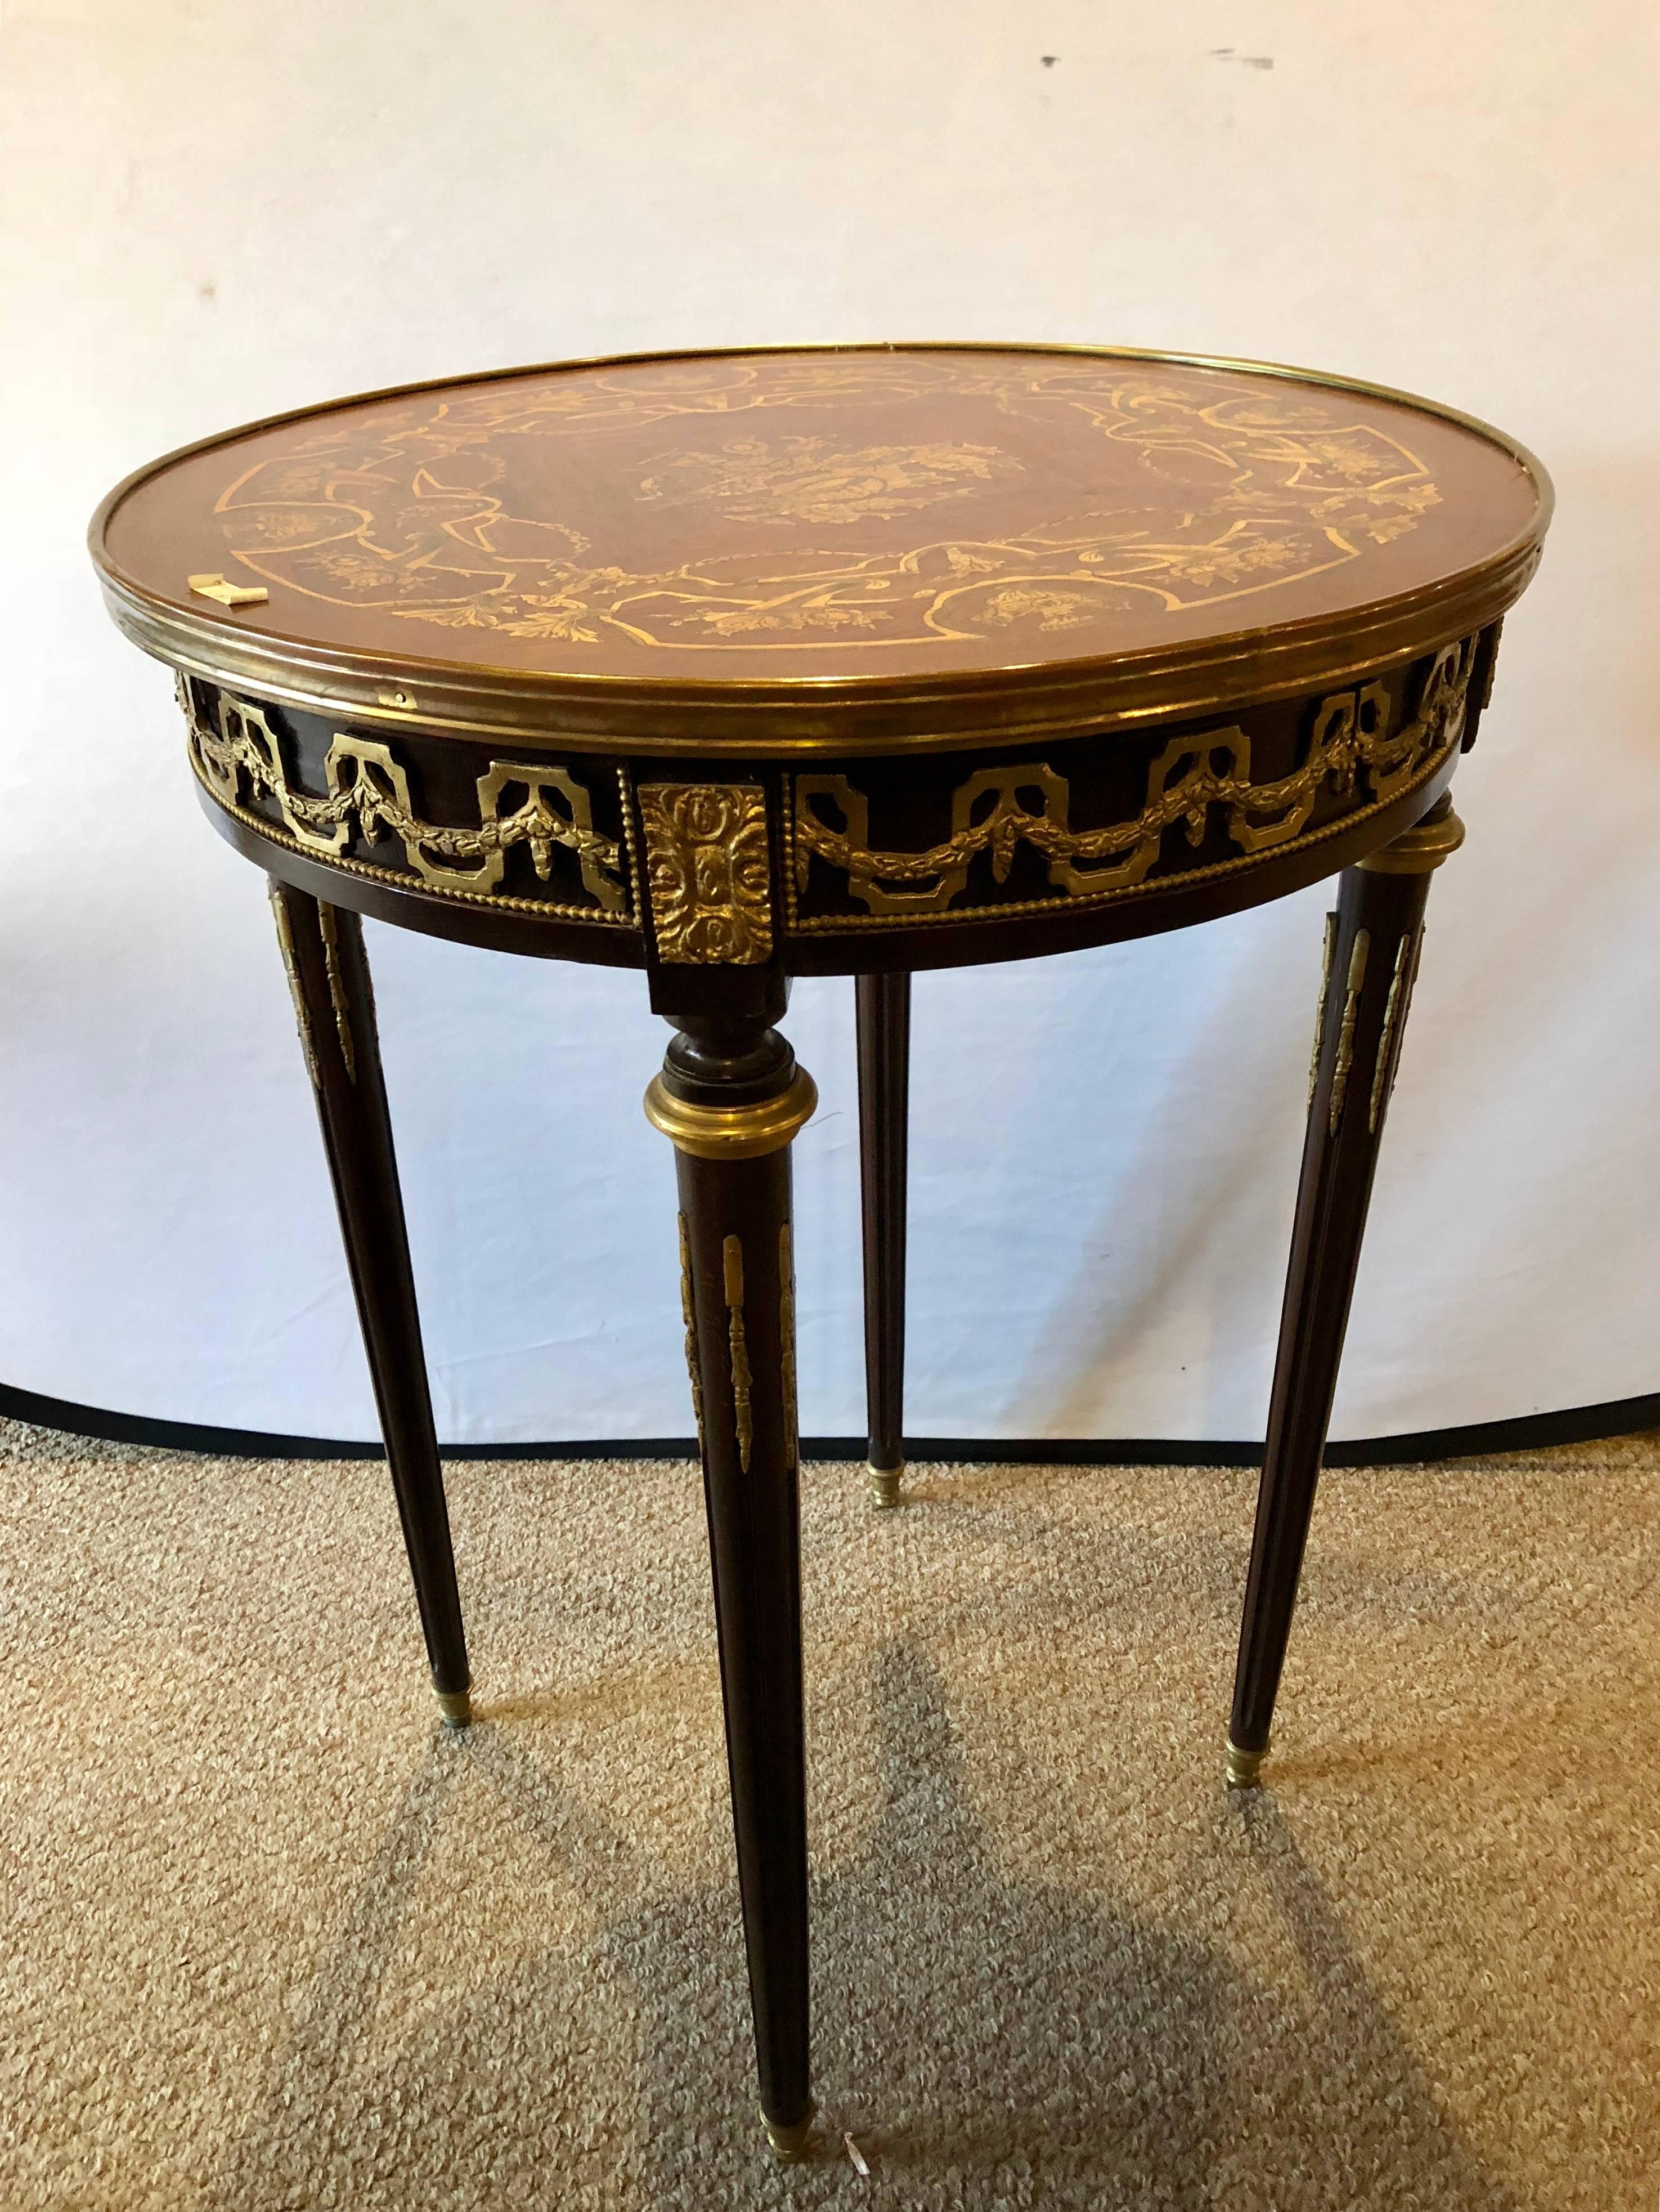 French Louis XVI style inlaid Bouilliote / lamp or end table. Having a wonderfully decorative inlaid top of satinwood design and heavy all over bronze mounts.